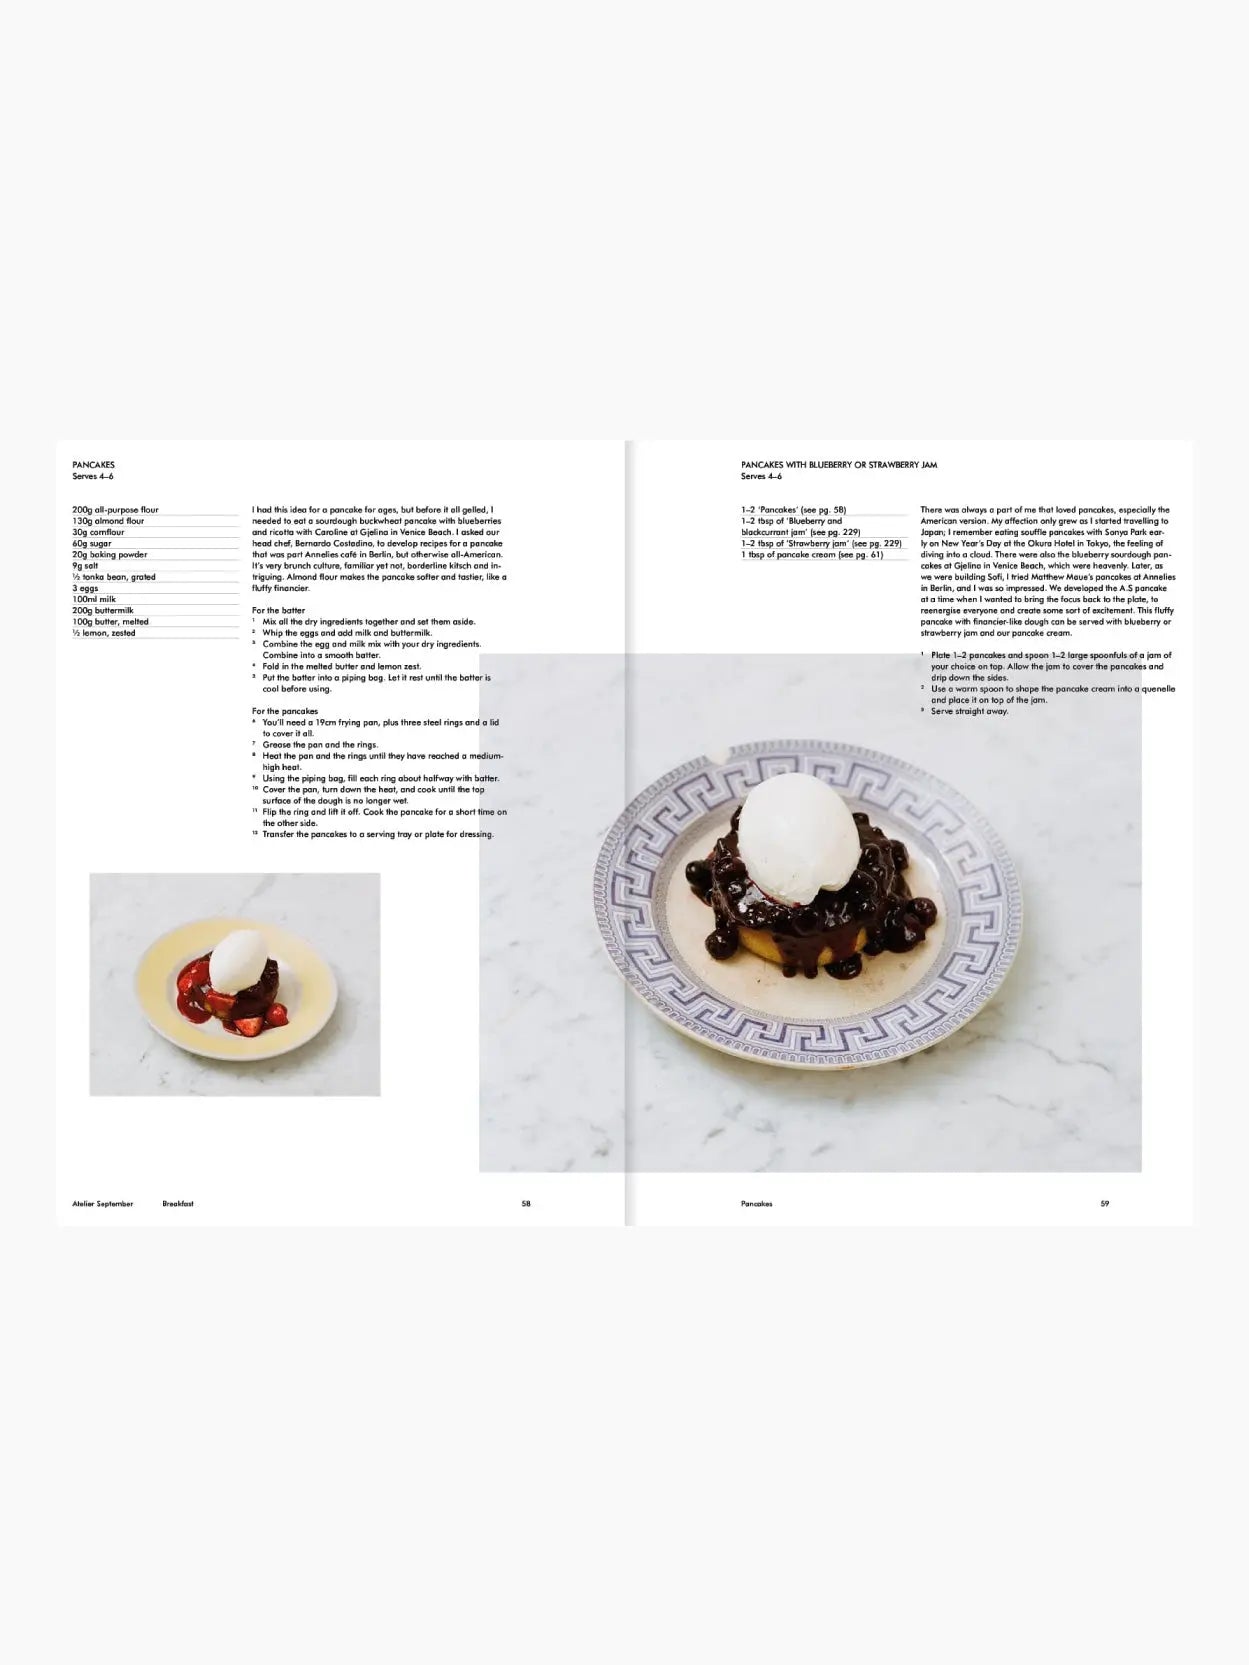 The image shows the cover of a book titled "Atelier September: A place for daytime cooking" by Frederik Bille Brahe, available at Bassalstore. The cover features a tall, artistic arrangement of white meringue on a plate set against a light gray background. The book is published by Apartamento in Barcelona.